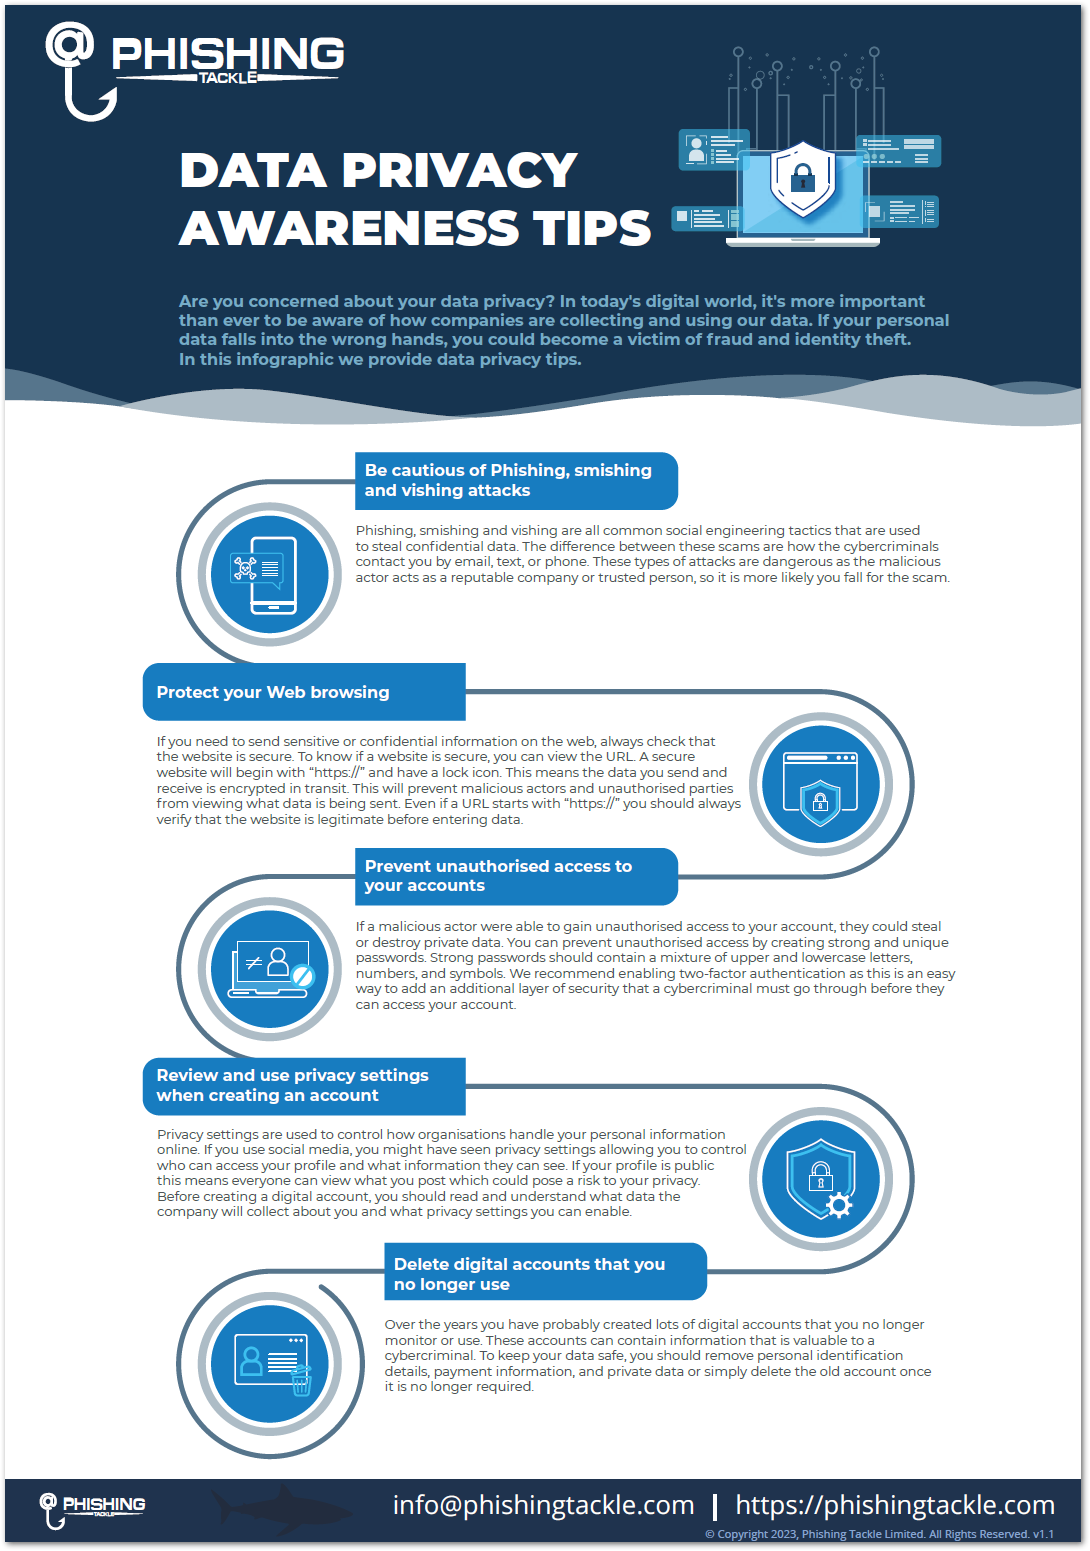 Phishing Tackle Data Privacy Infographic